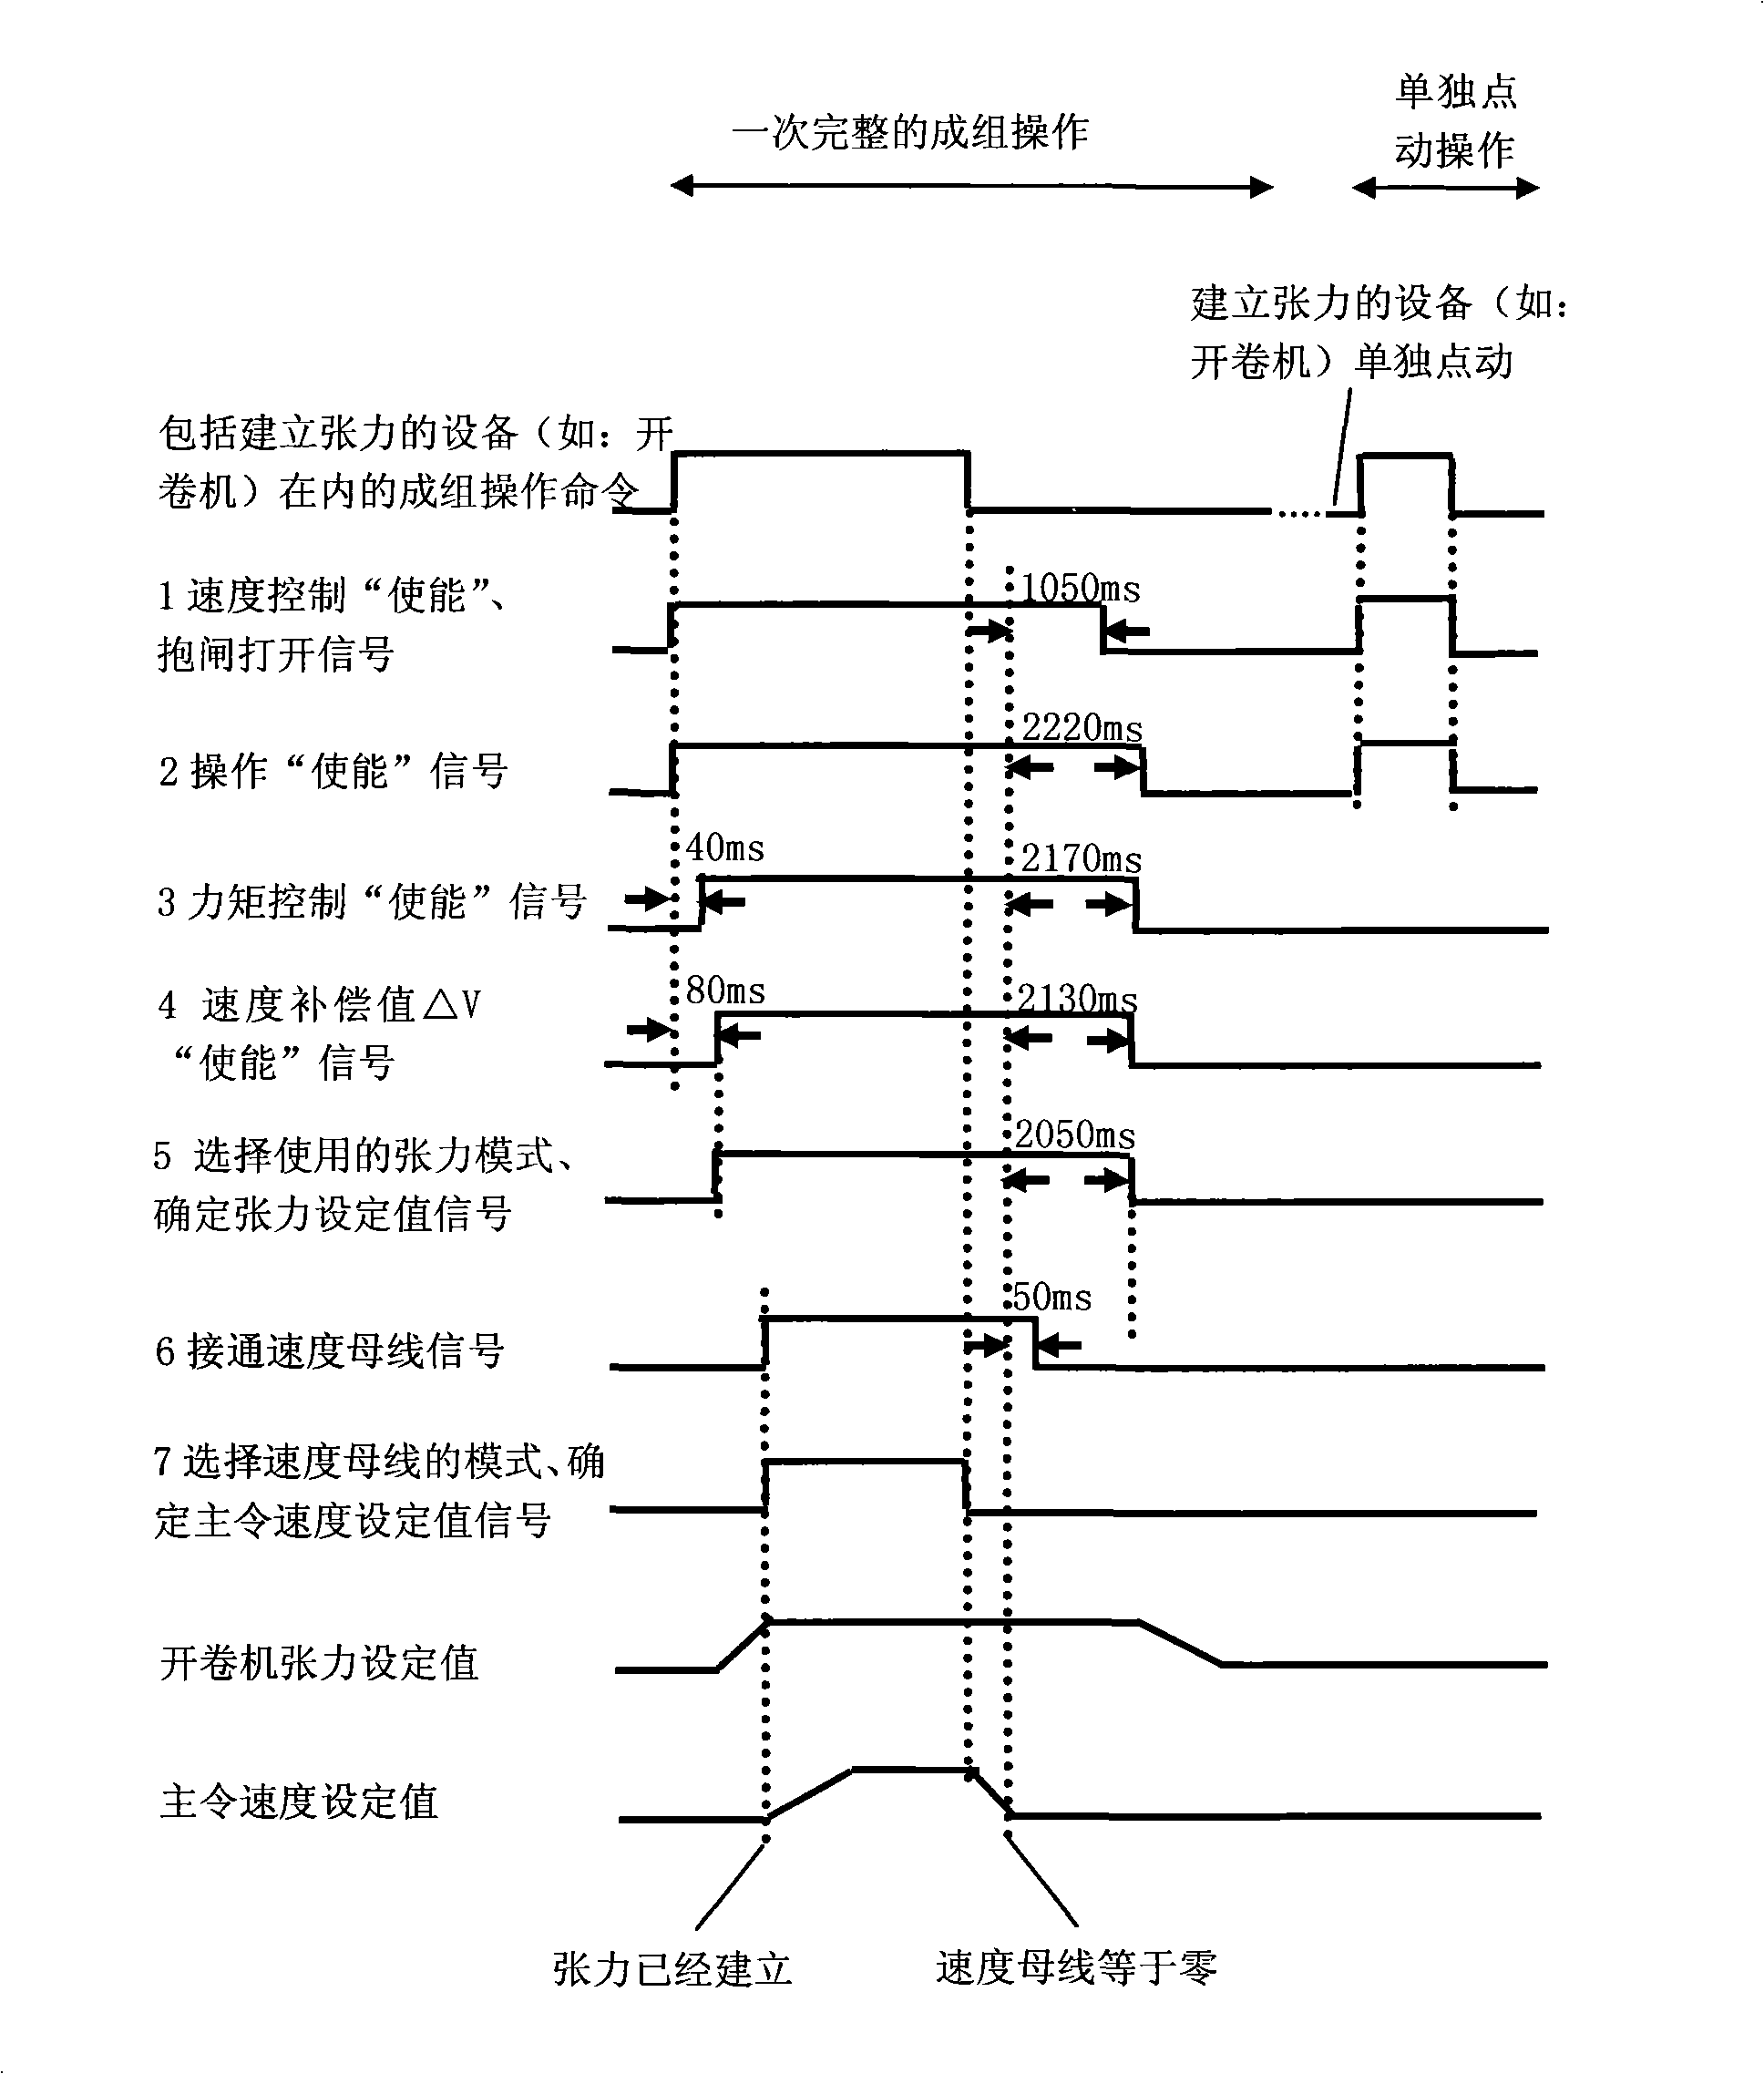 Method for controlling band steel continuous production units utilizing coordinating control module